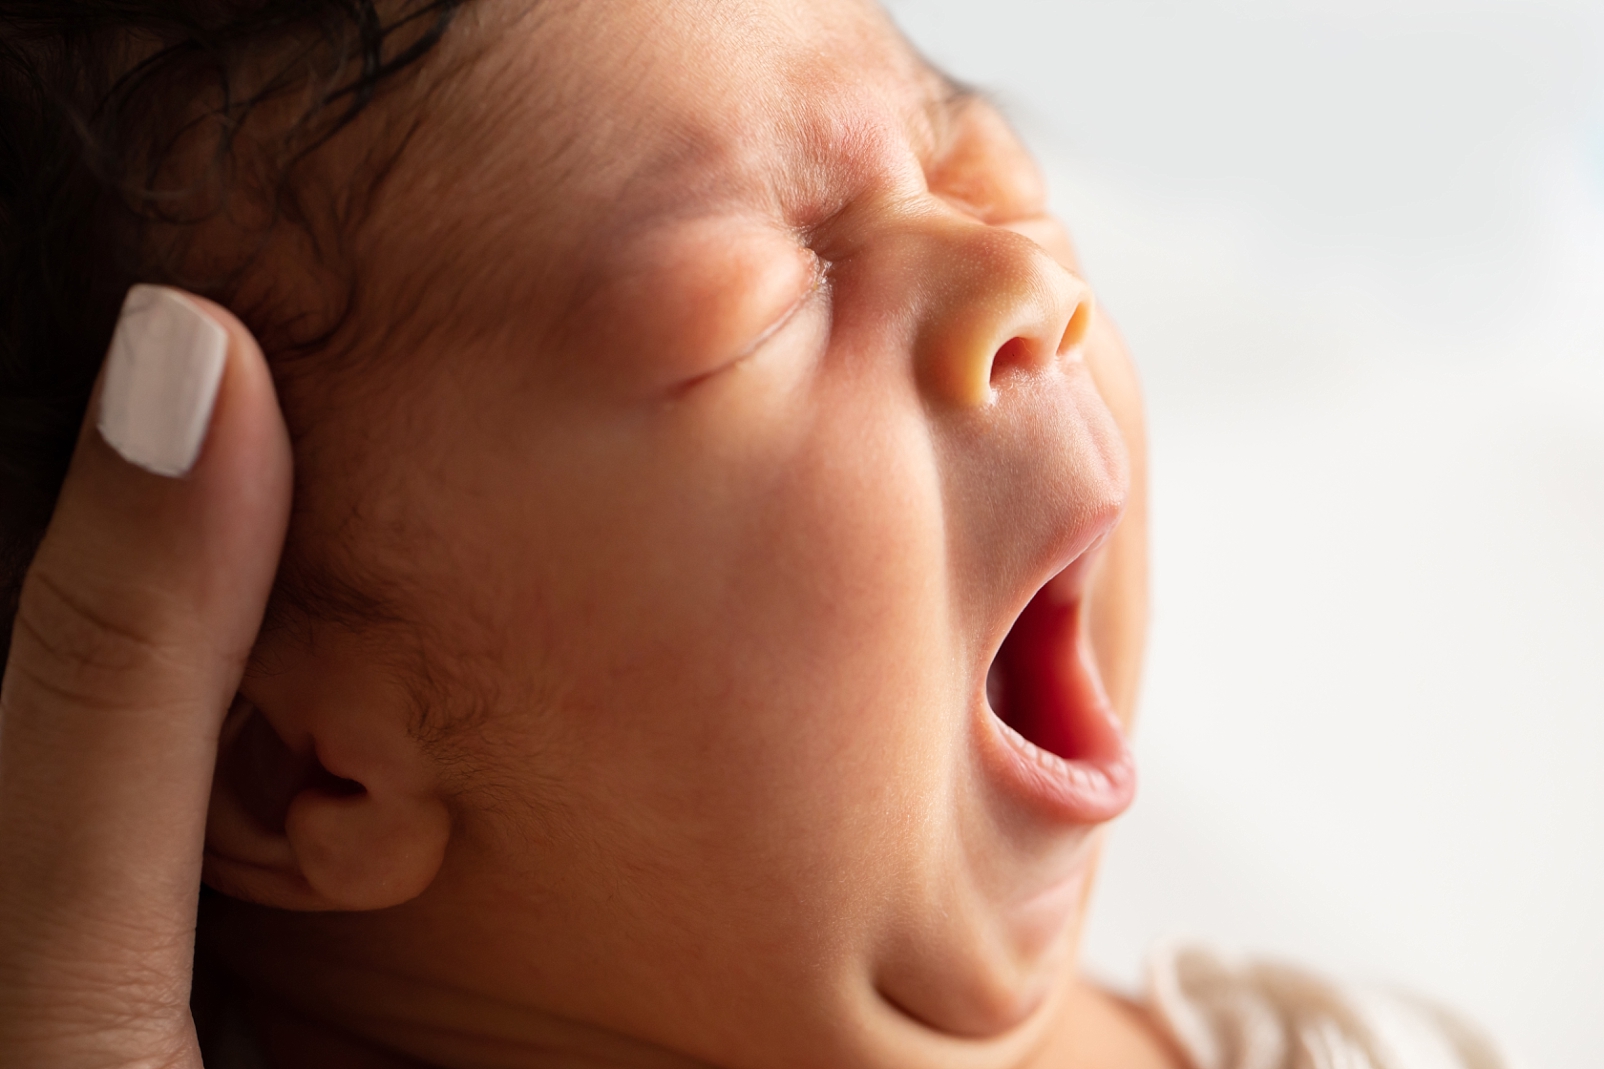 Baby yawns in a macro close-up photo